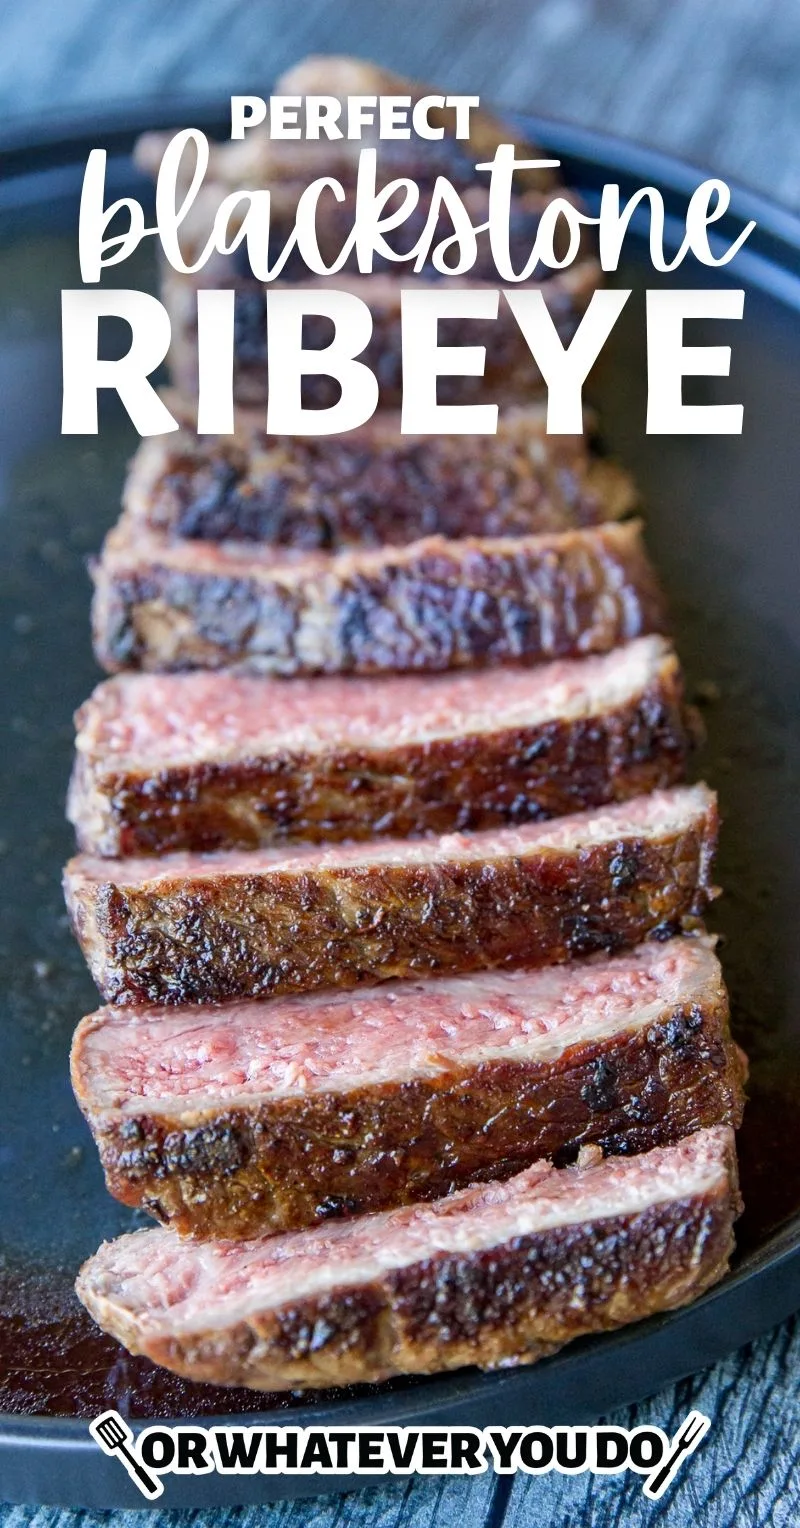 Cooking Steak on a Griddle - 3 Tips for the Best Blackstone Steak